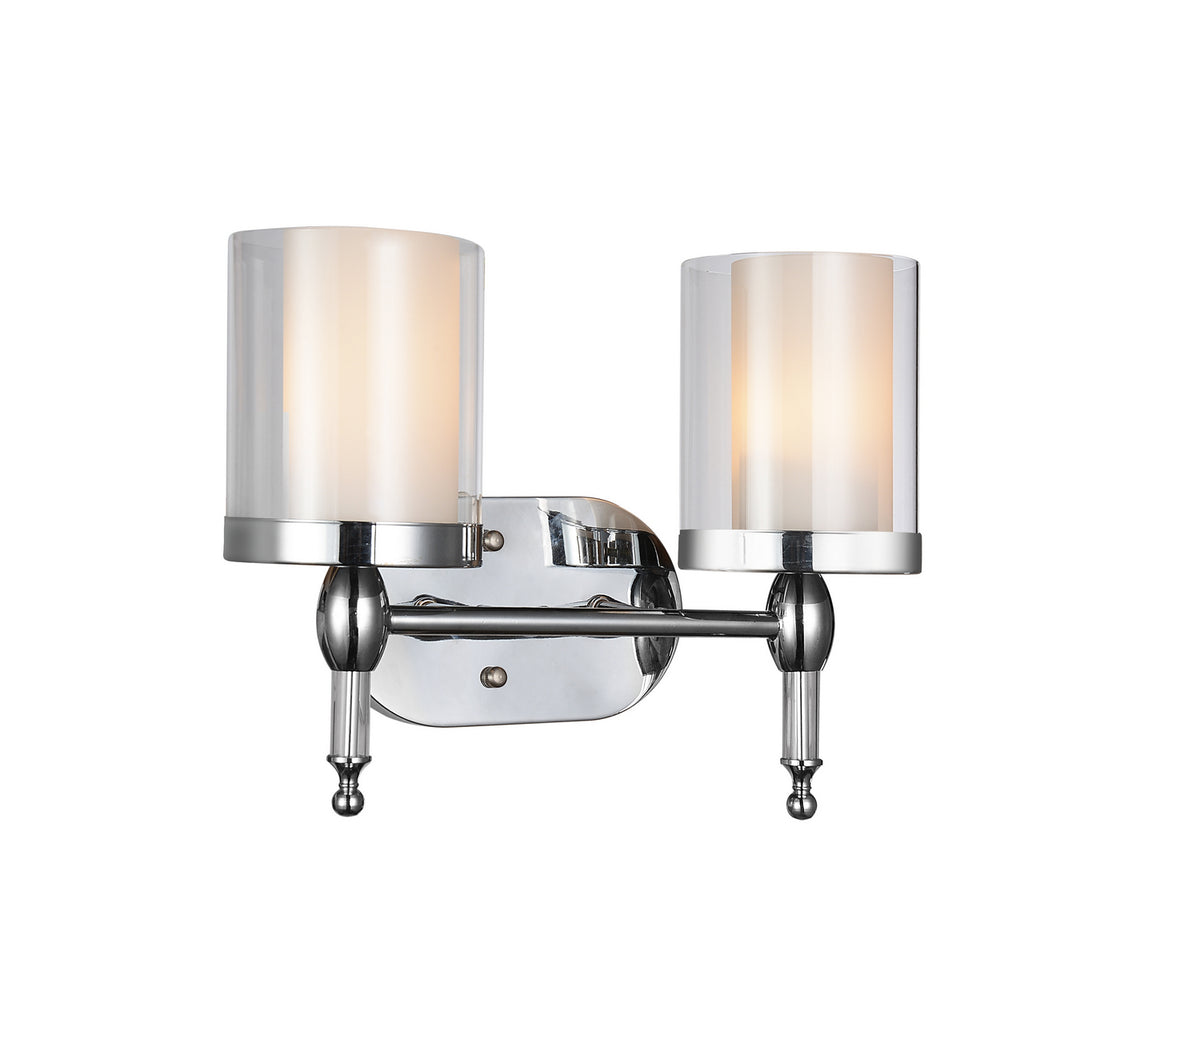 CWI Lighting - 9851W14-2-601 - Two Light Vanity - Maybelle - Chrome